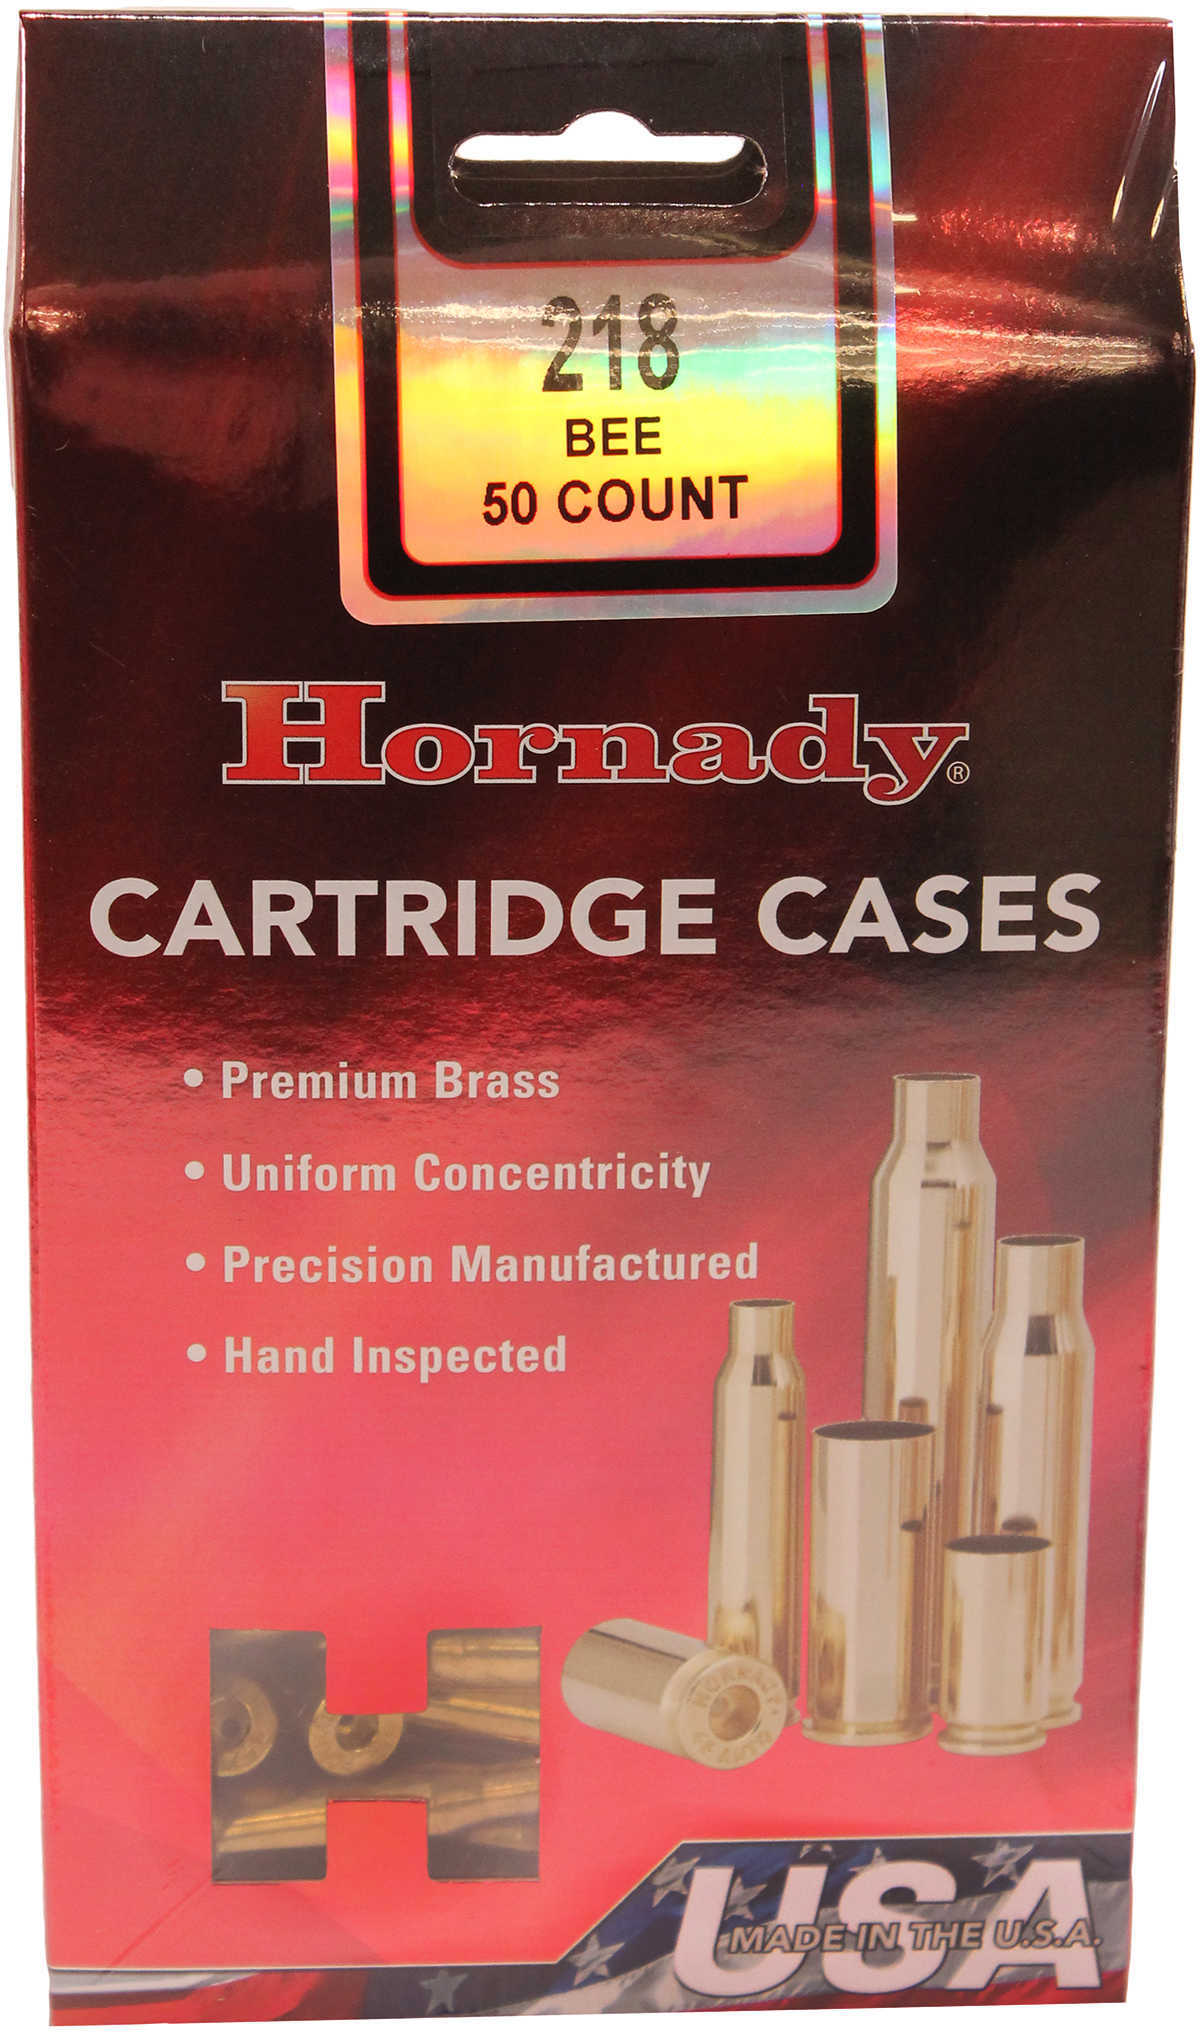 Hornady Unprimed Cases 218 Bee, 50 Per Box Md: 8601